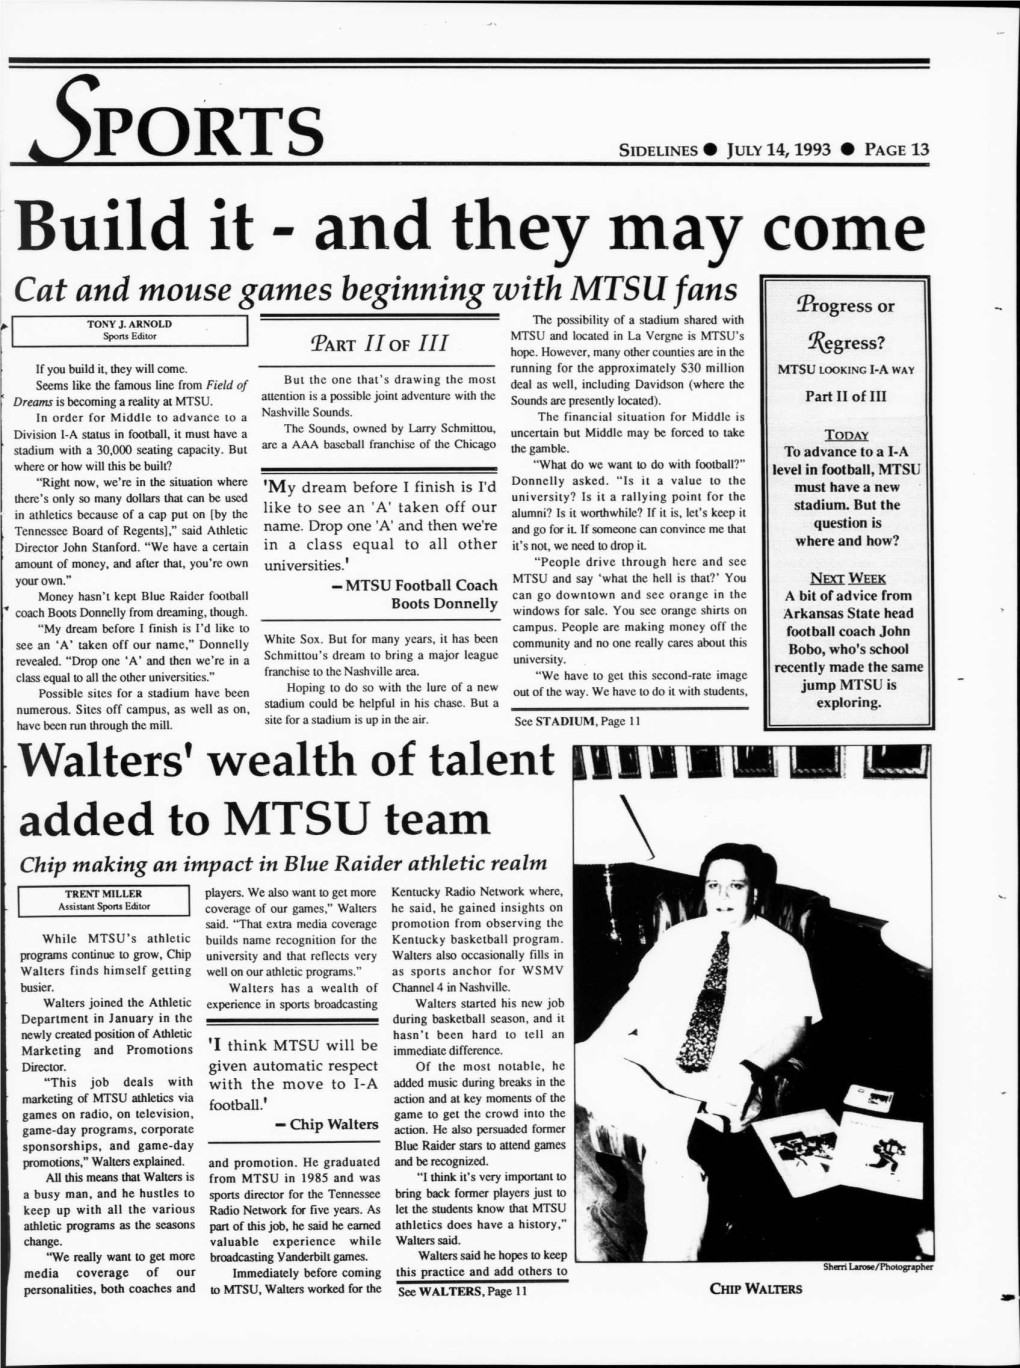 SPORTS SIDELINES • JULY 14,1993 • PAGE 13 Build It - and They May Come